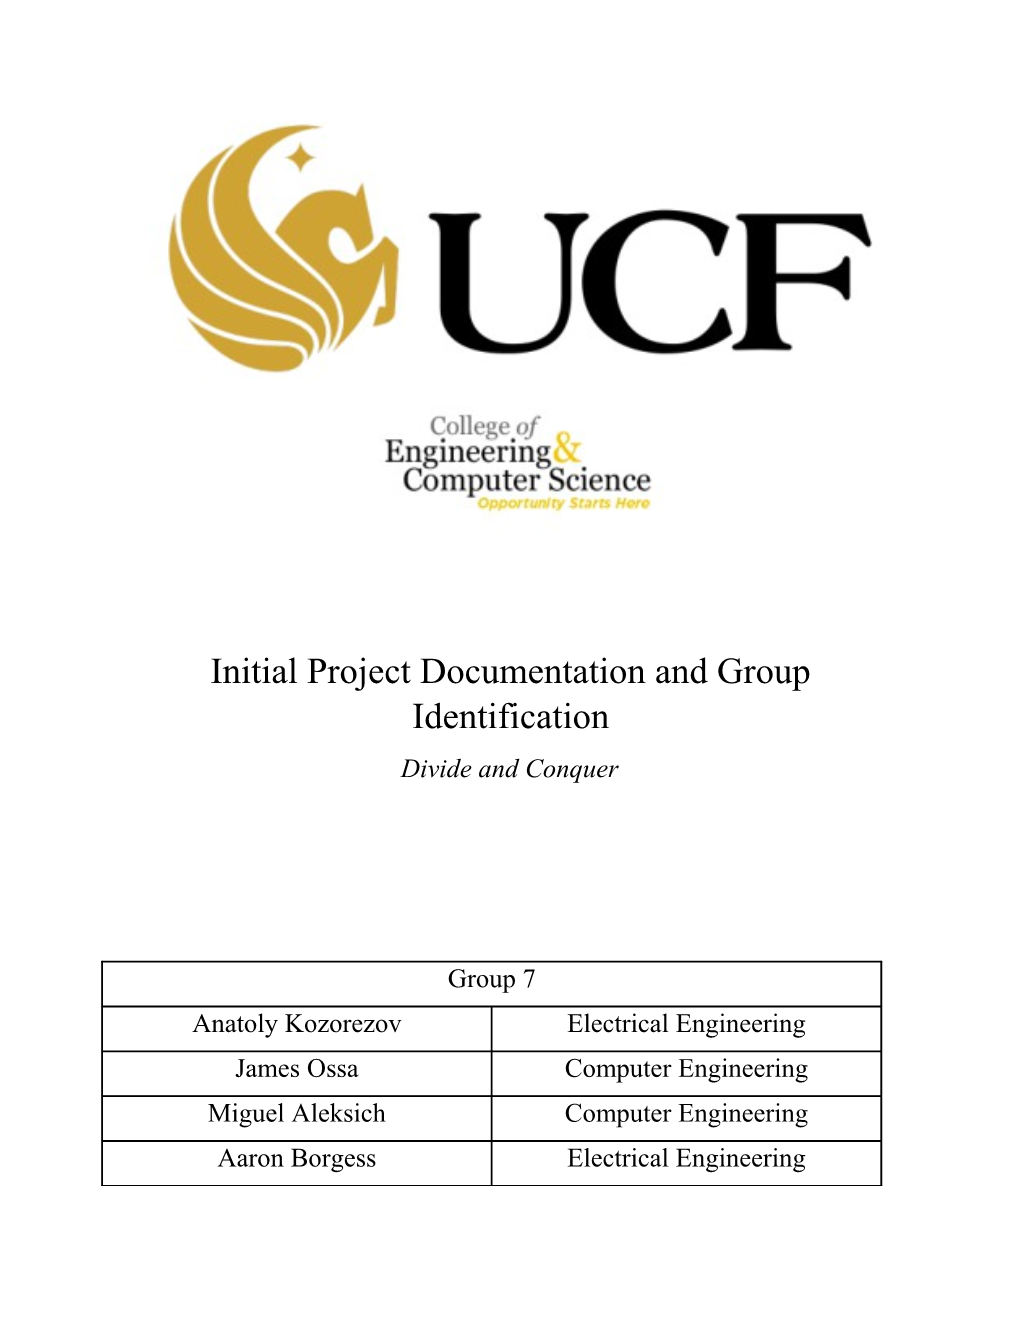 Initial Project Documentation and Group Identification